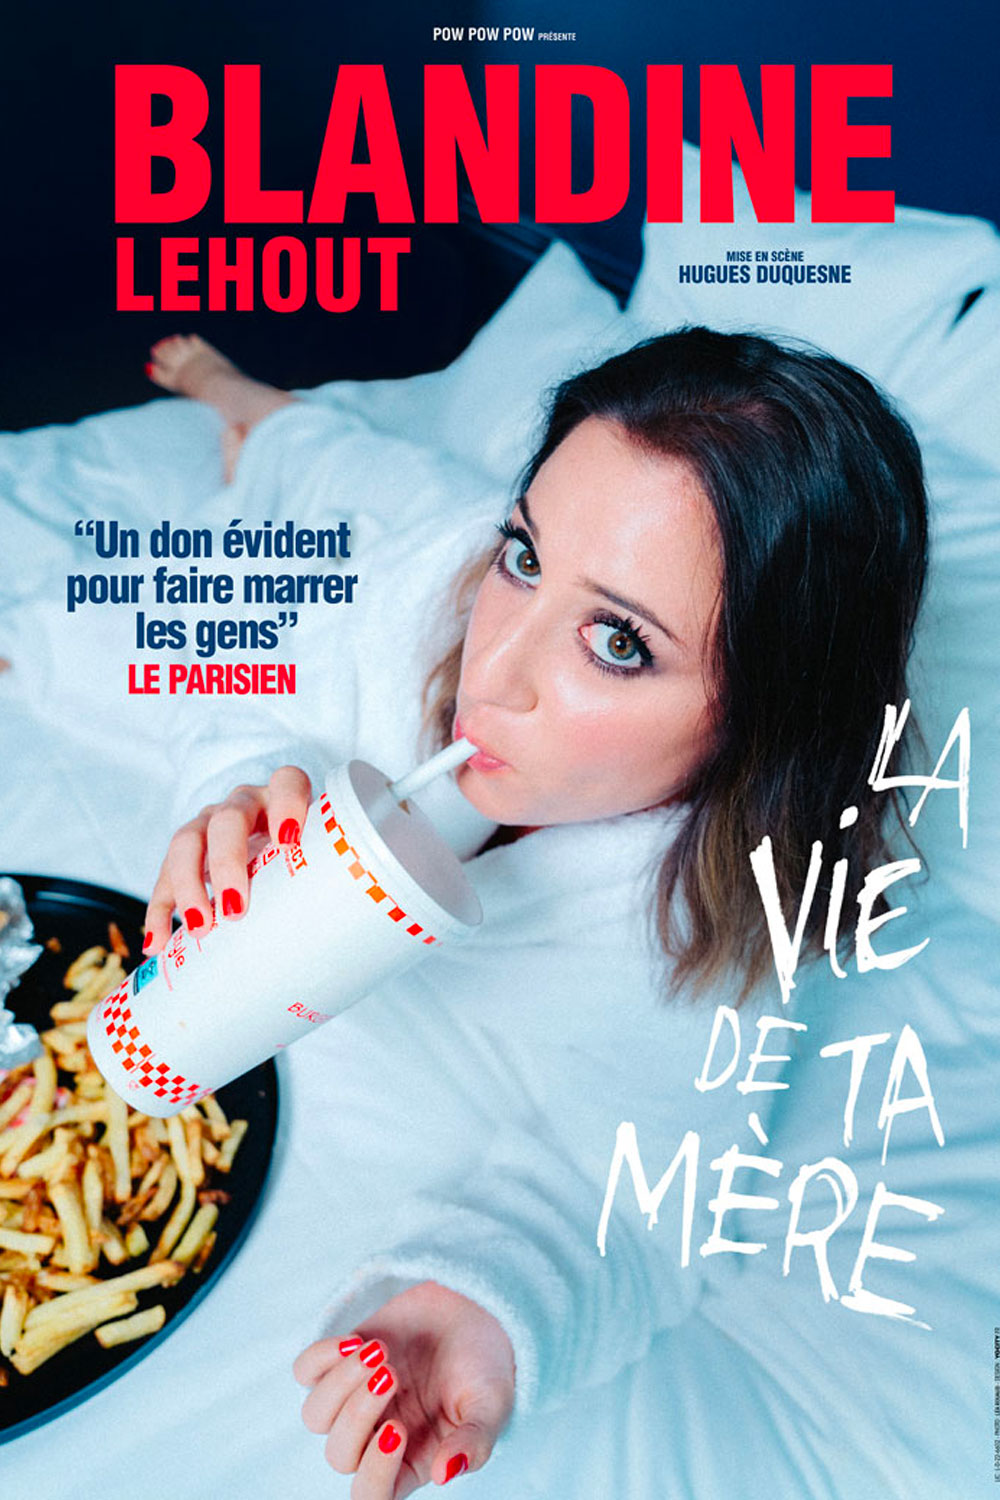 l'andine lehout festival Humour Montpellier stand up theatre rire